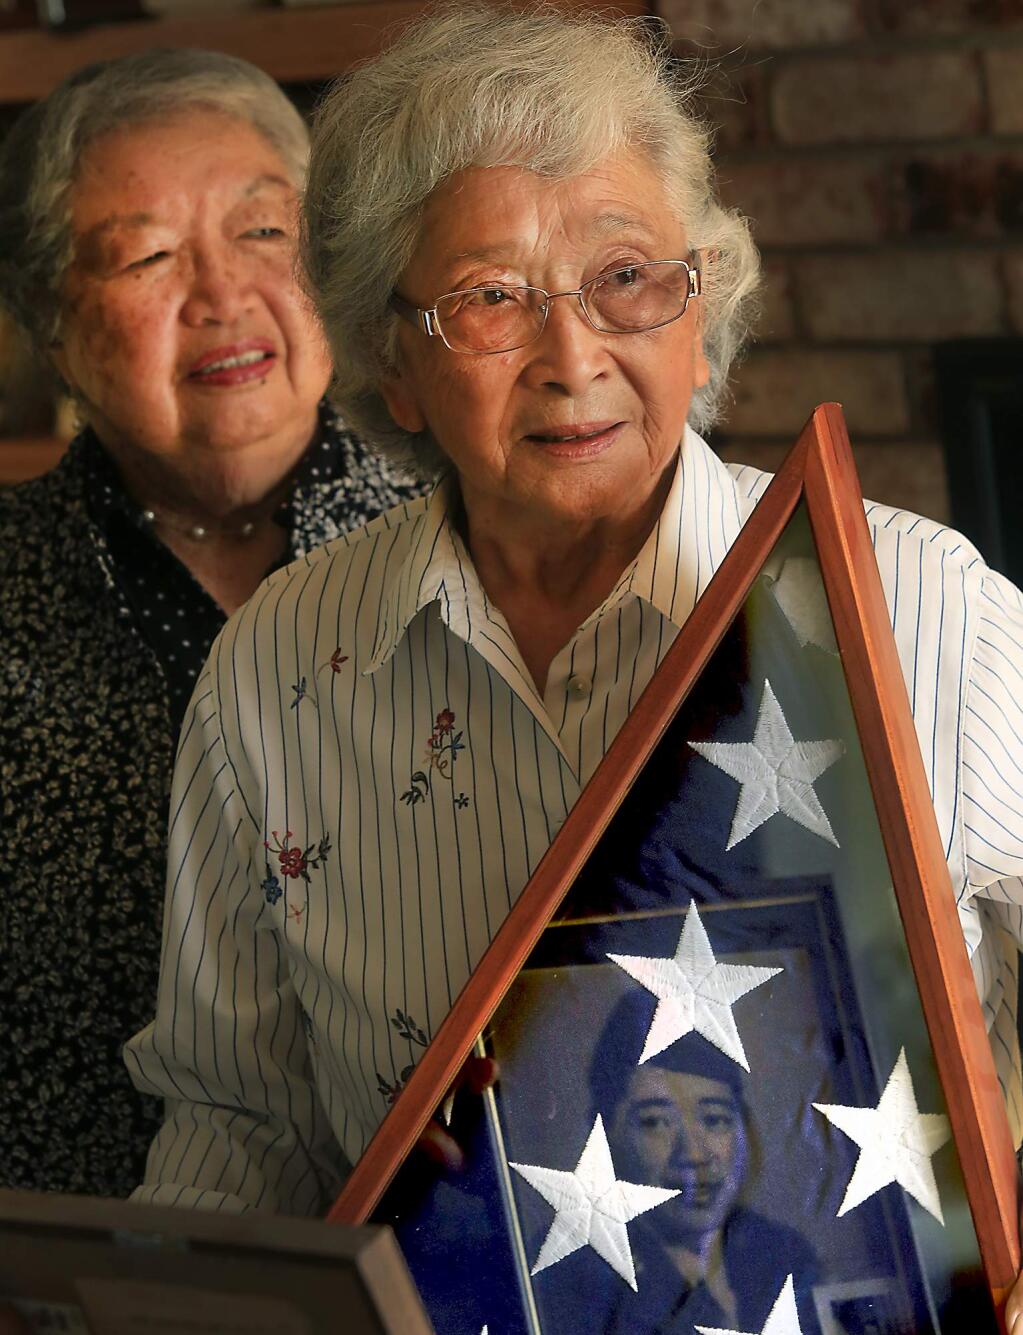 Marie Sugiyama, left and her sister-in-law Alyce Yamasaki Sugiyama with an American flag that belonged to her husband Harry Sugiyama who died in 2014. All three were in local World War II Japanese internment camps. Her husband was drafted out of the camp by the U.S. Armed Forces to fight in the war. (Kent Porter / Press Democrat) 2016